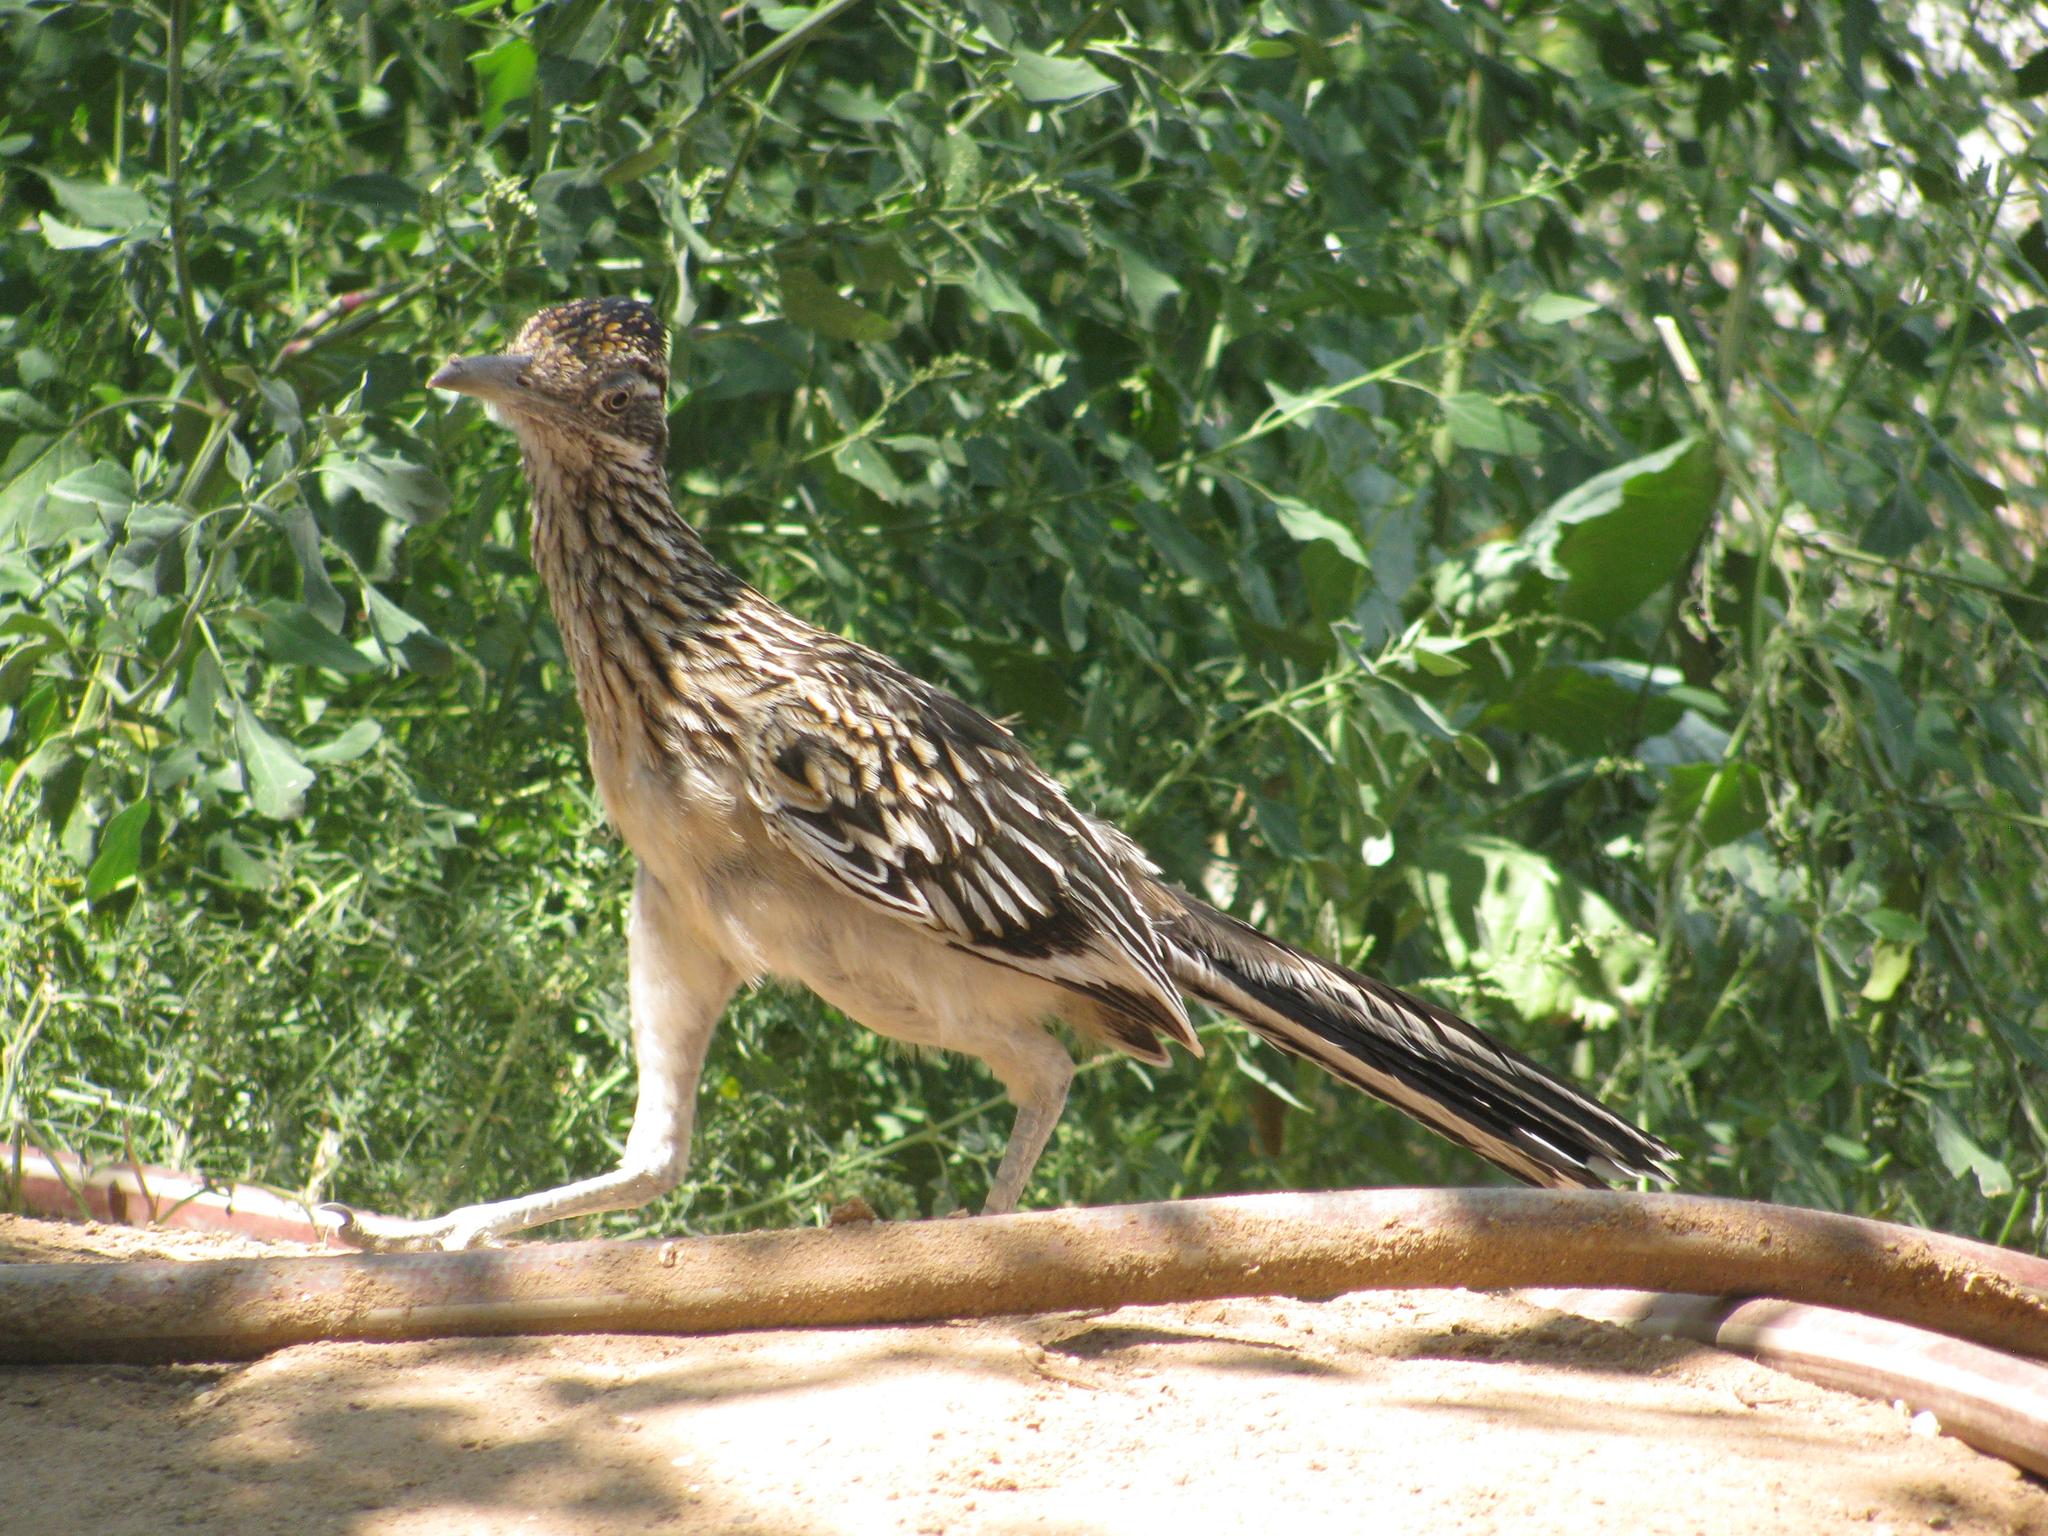 A roadrunner in the shade of a quelites patch